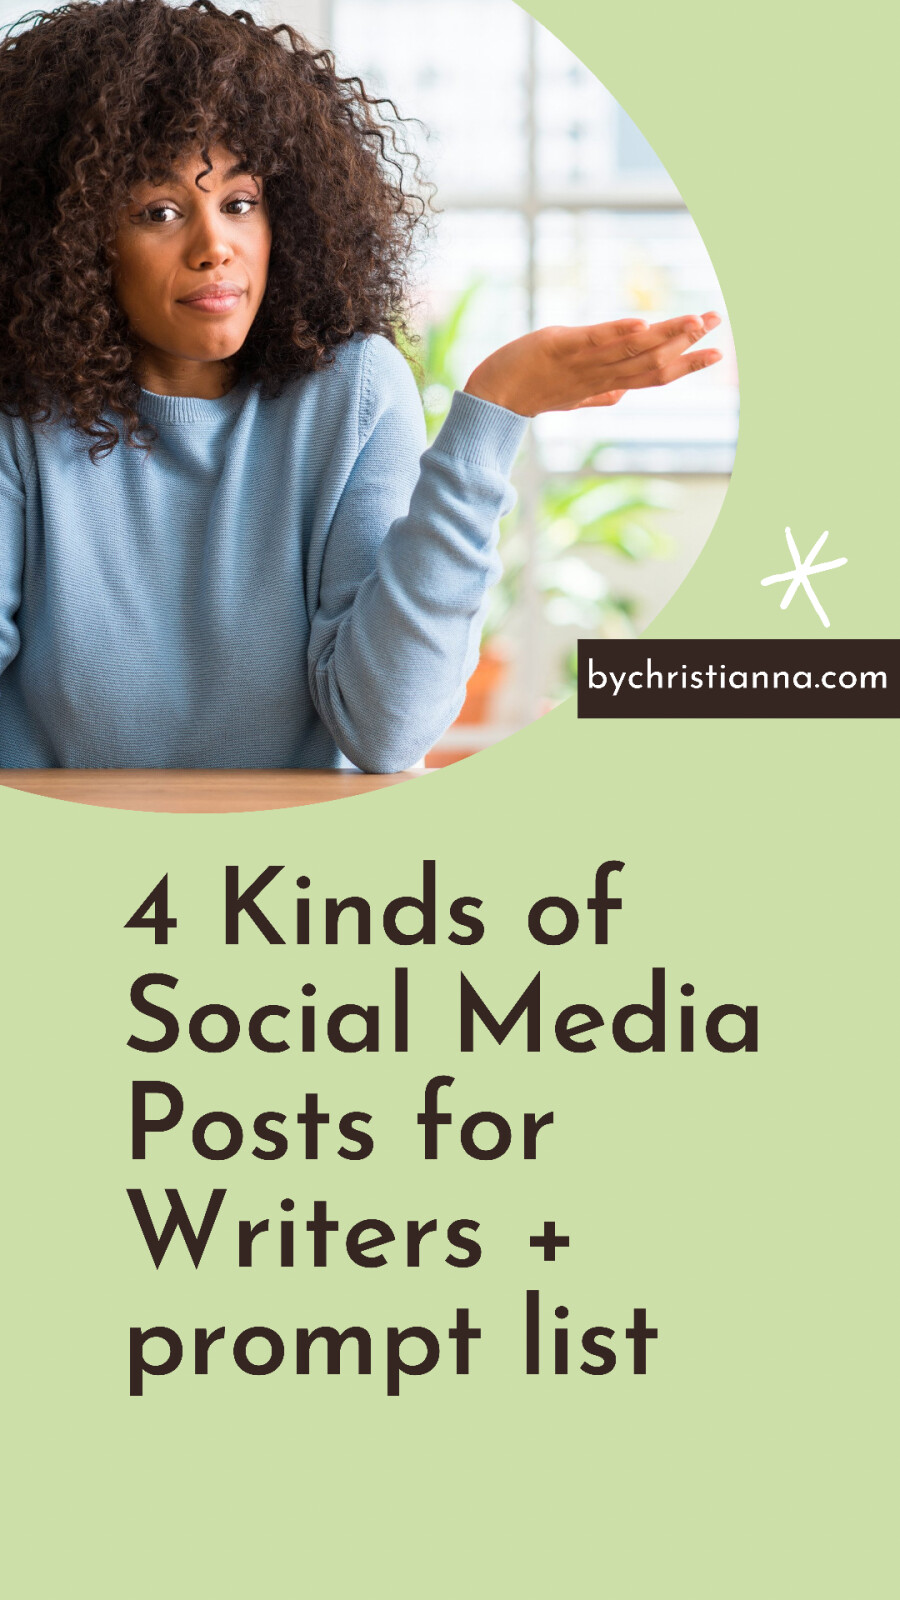 4 Kinds of Social Posts for Writers + prompt list